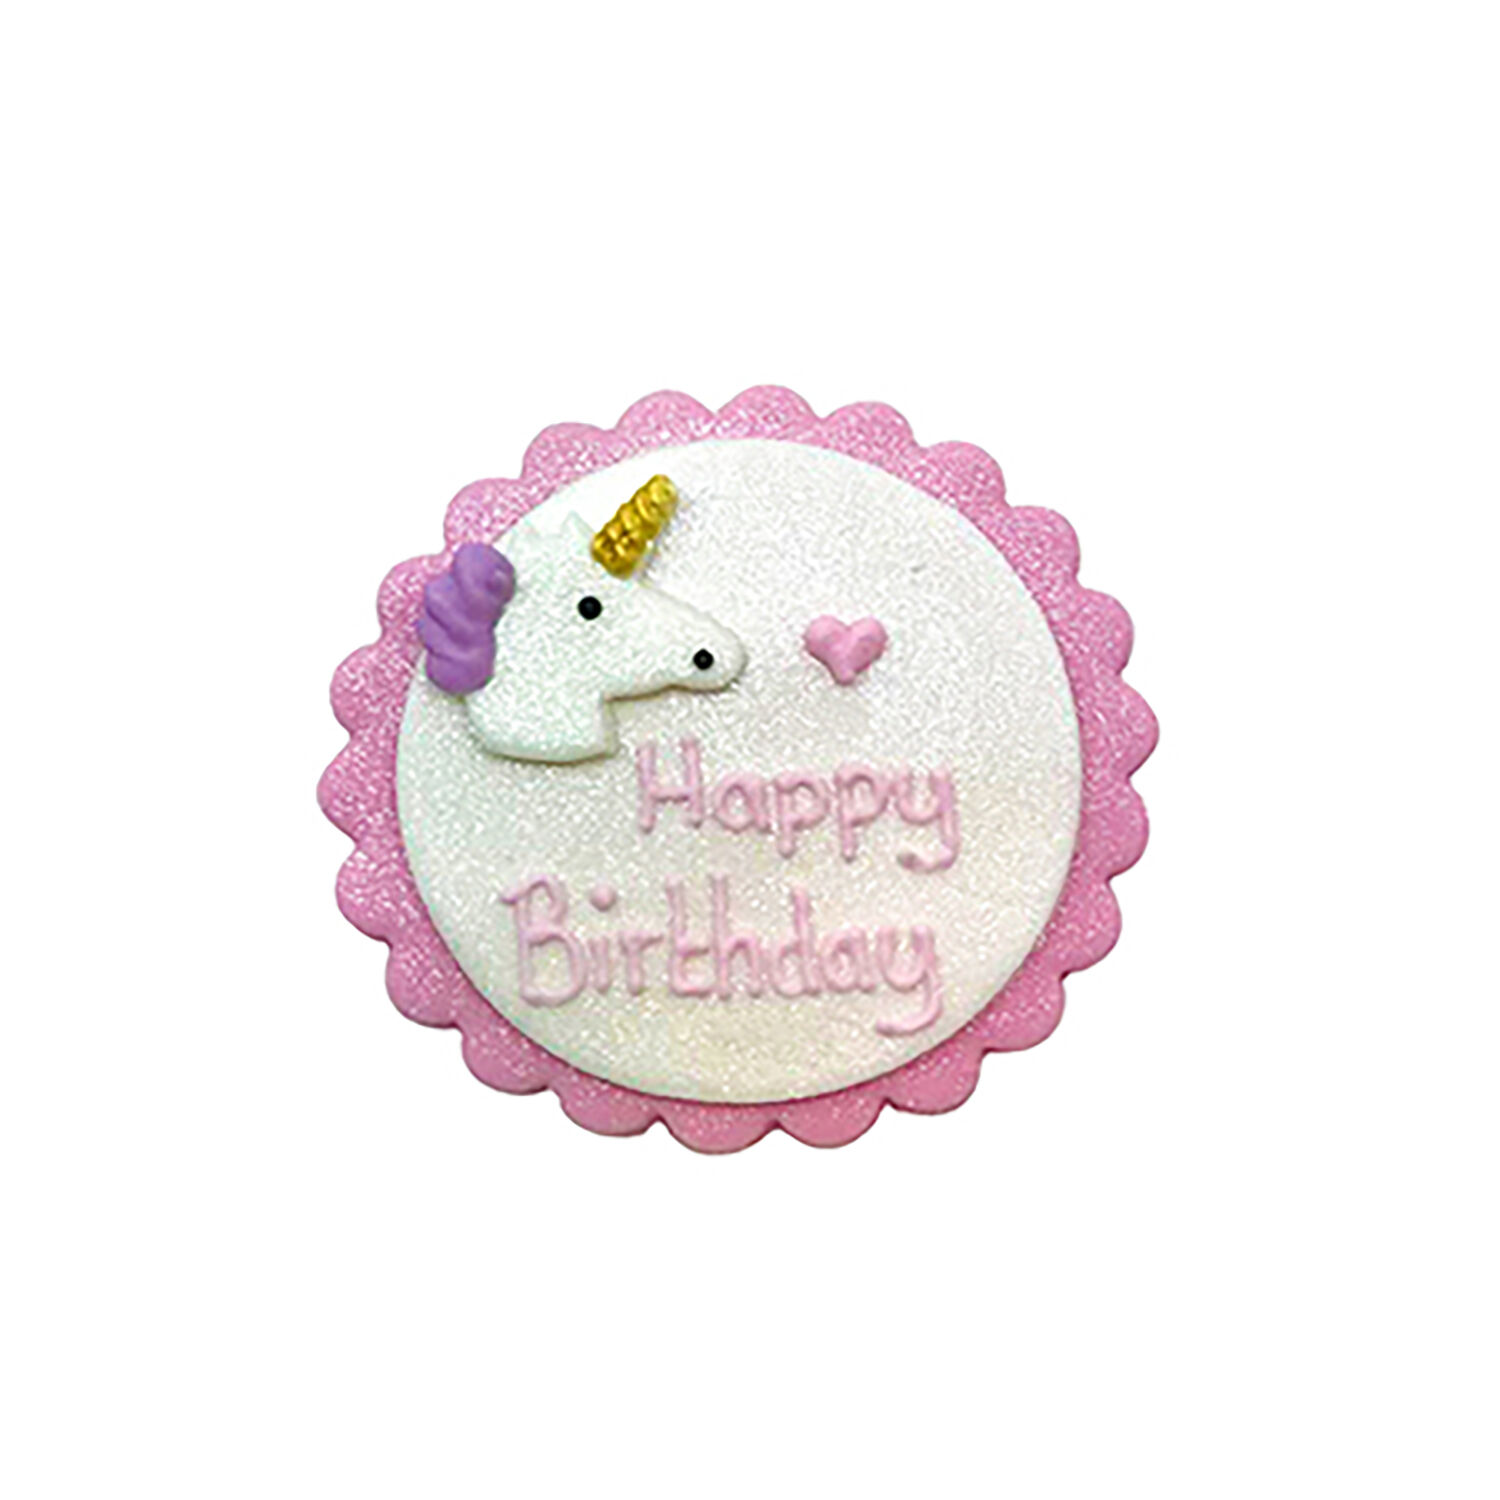 Unicorn Party pack edible cake topper wafer or icing sheet